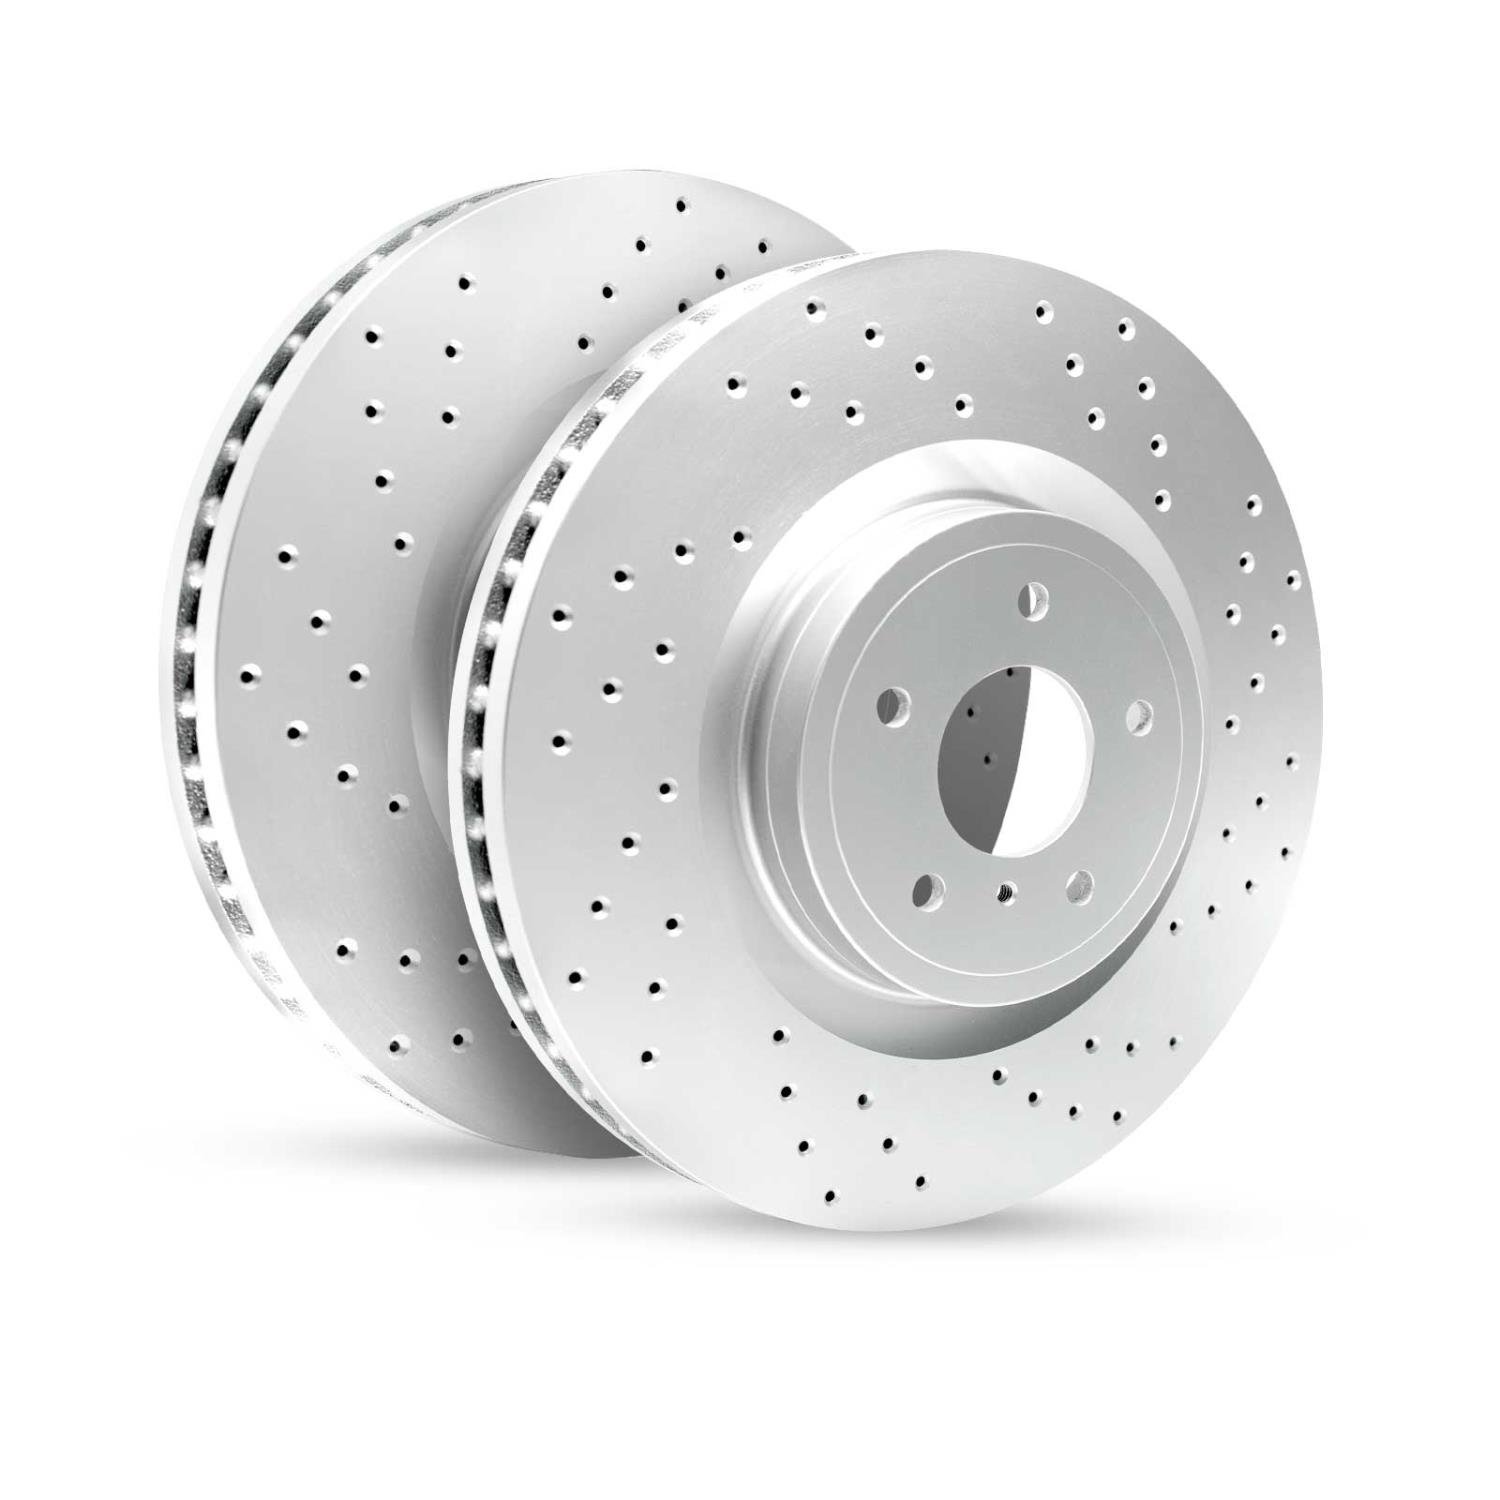 GEO-Carbon Drilled/Slotted Rotors, 1991-1999 BMW, Position: Rear